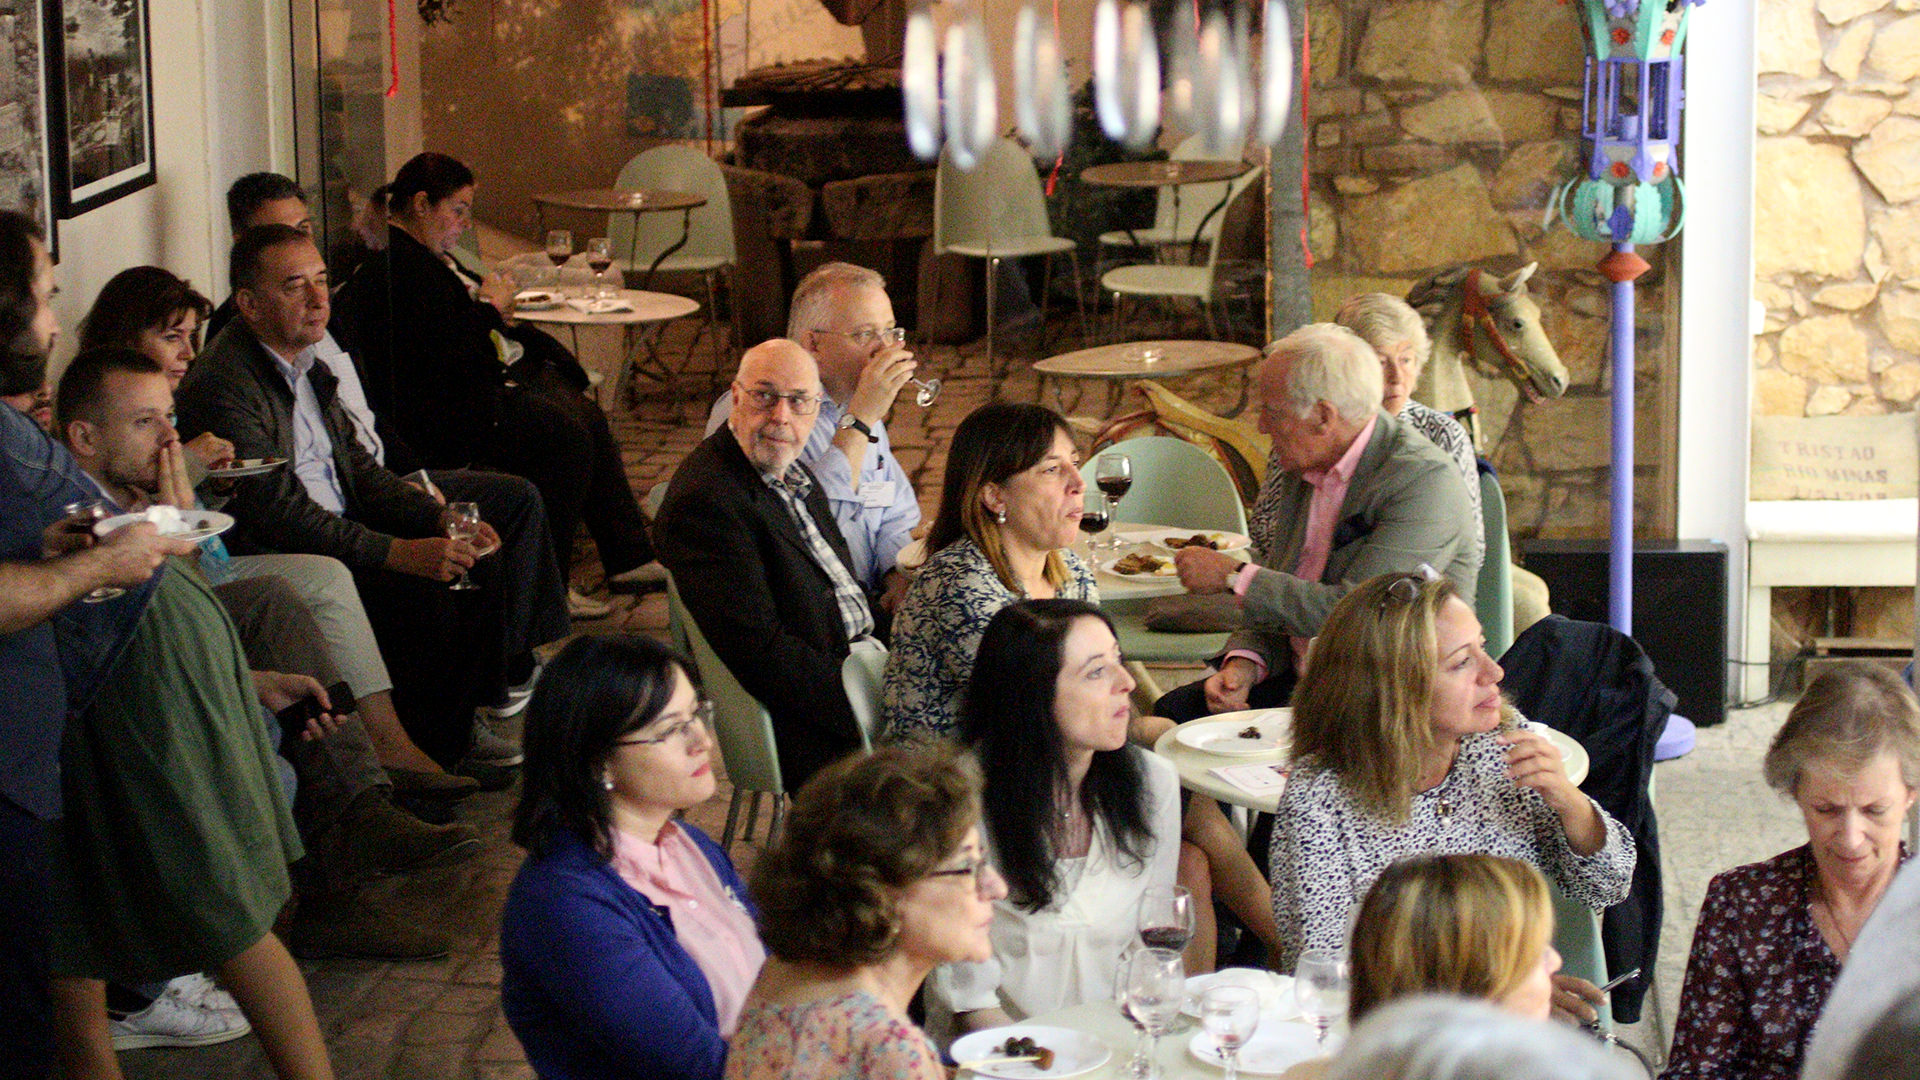 dinner party in support of the Ethnological Museum of Thrace